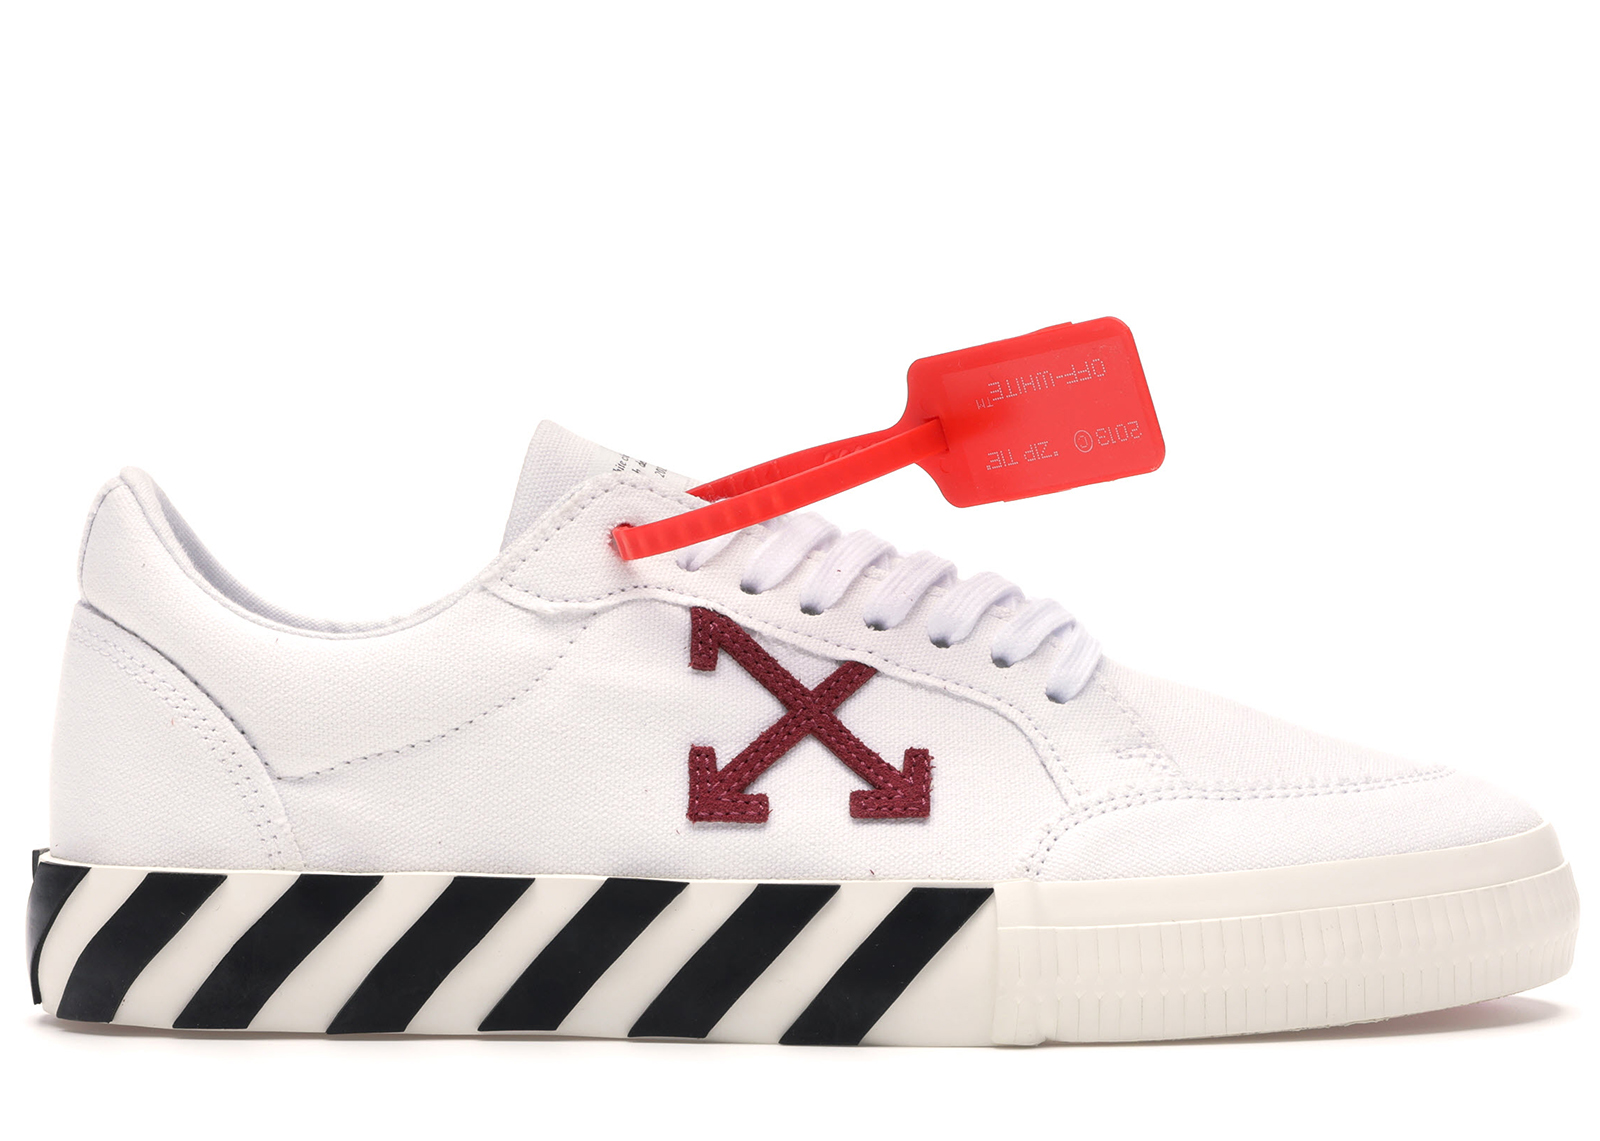 vulc sneakers off white